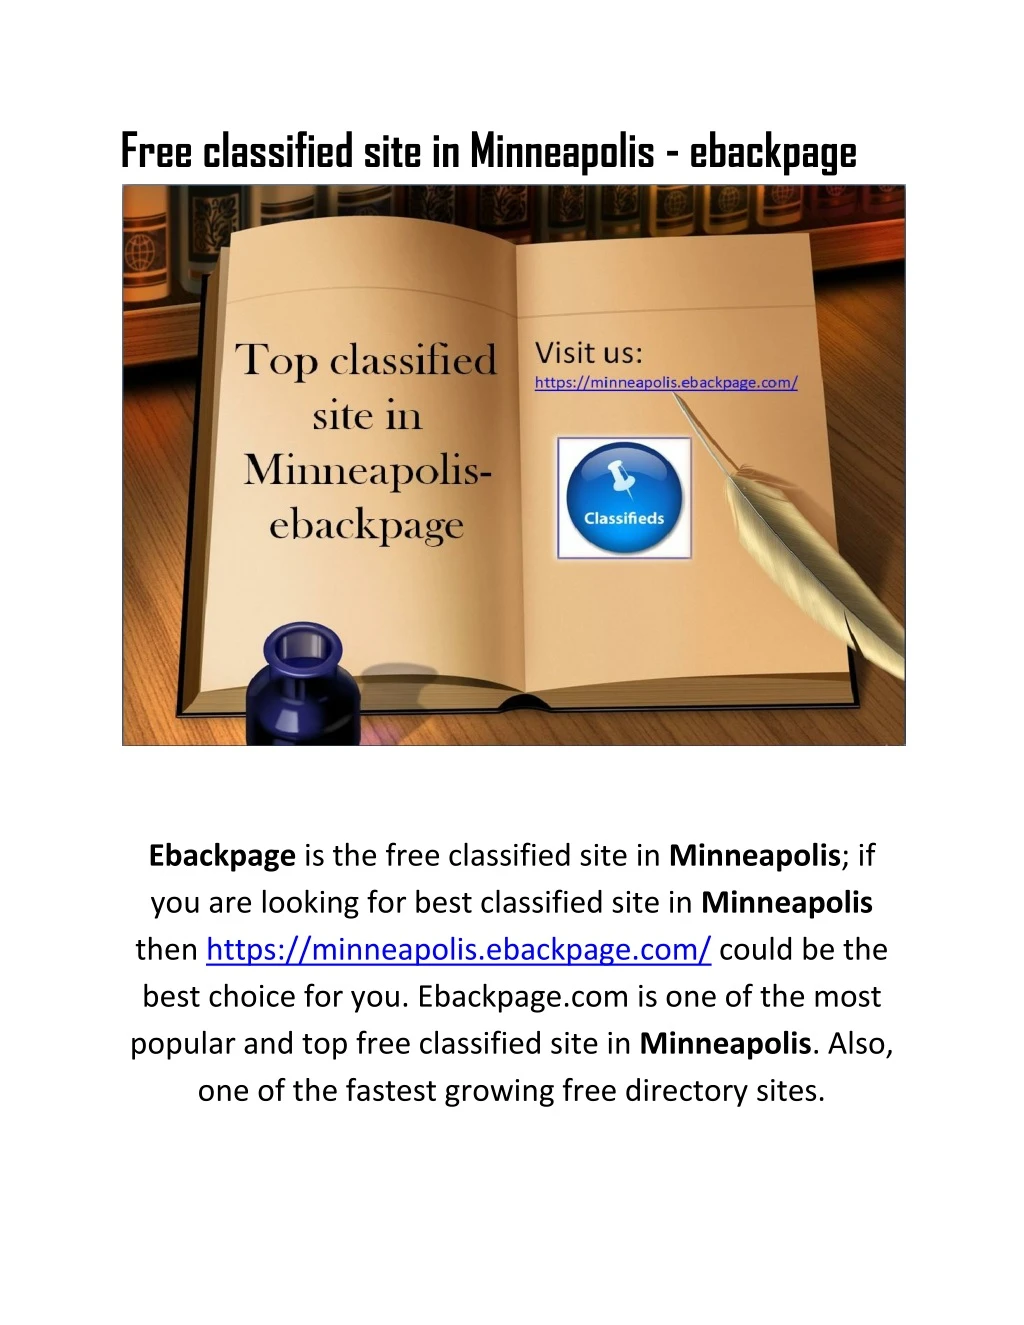 free classified site in minneapolis ebackpage